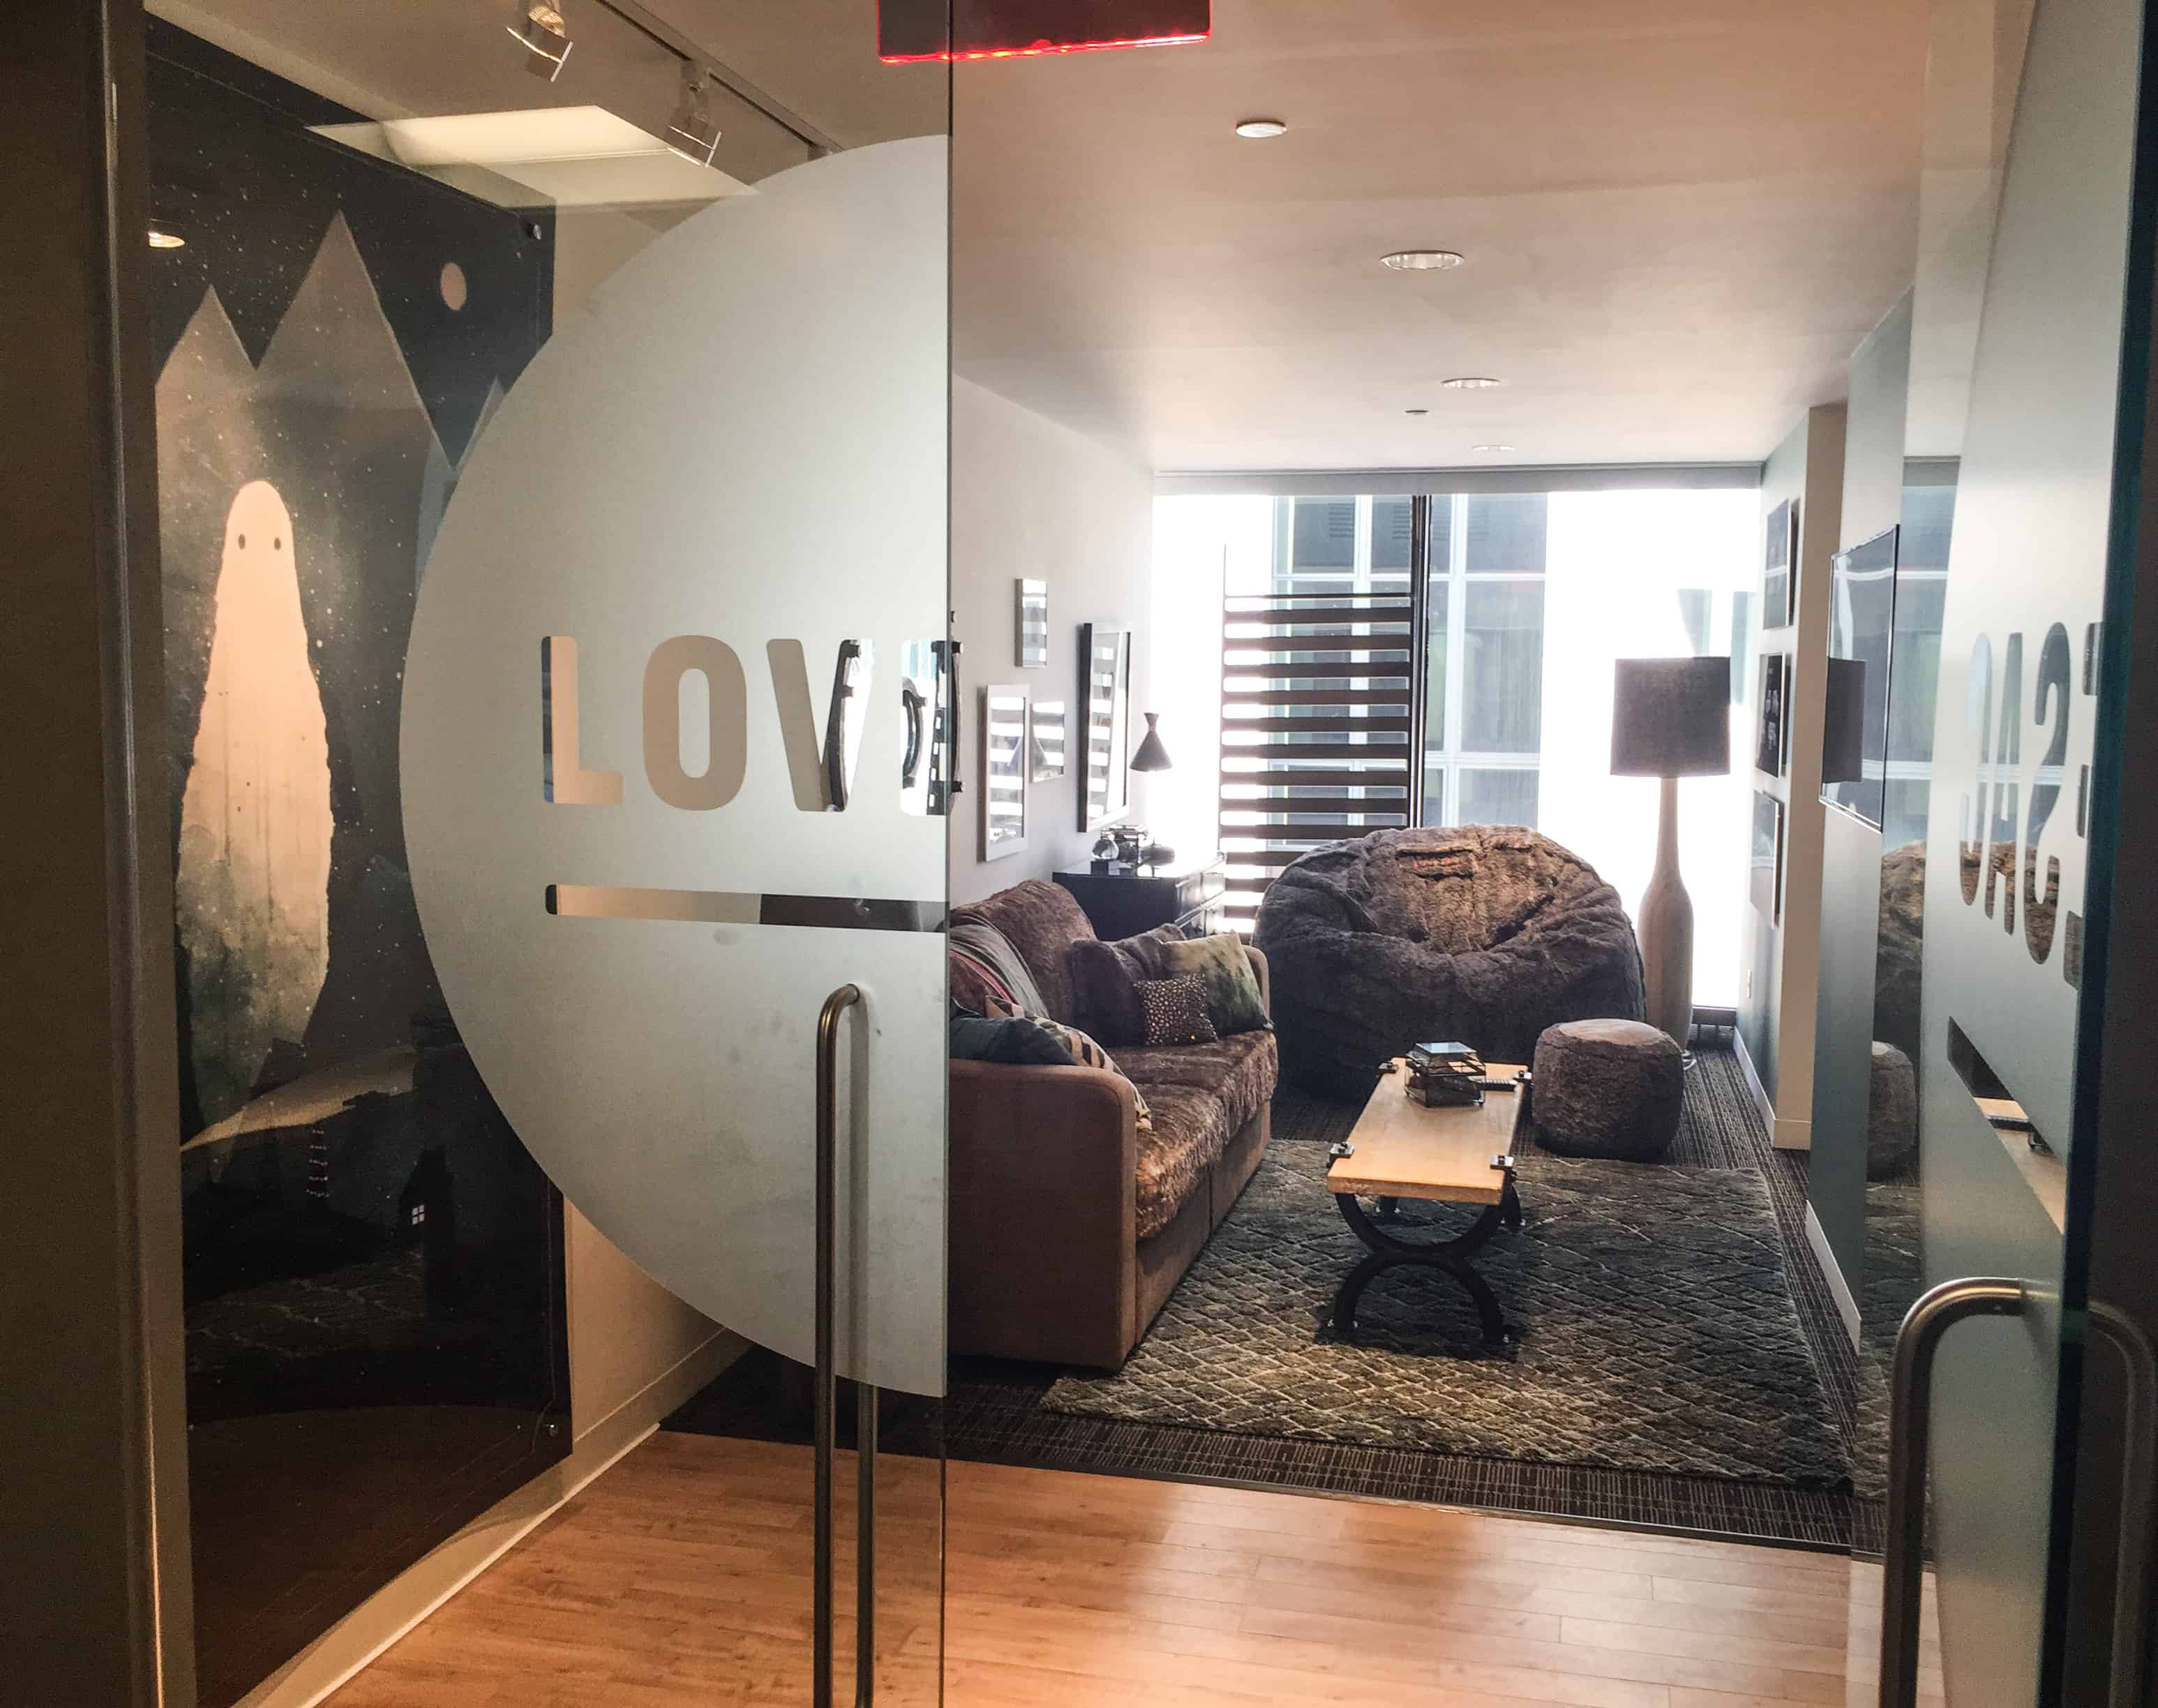 Lovesac Offices Entry